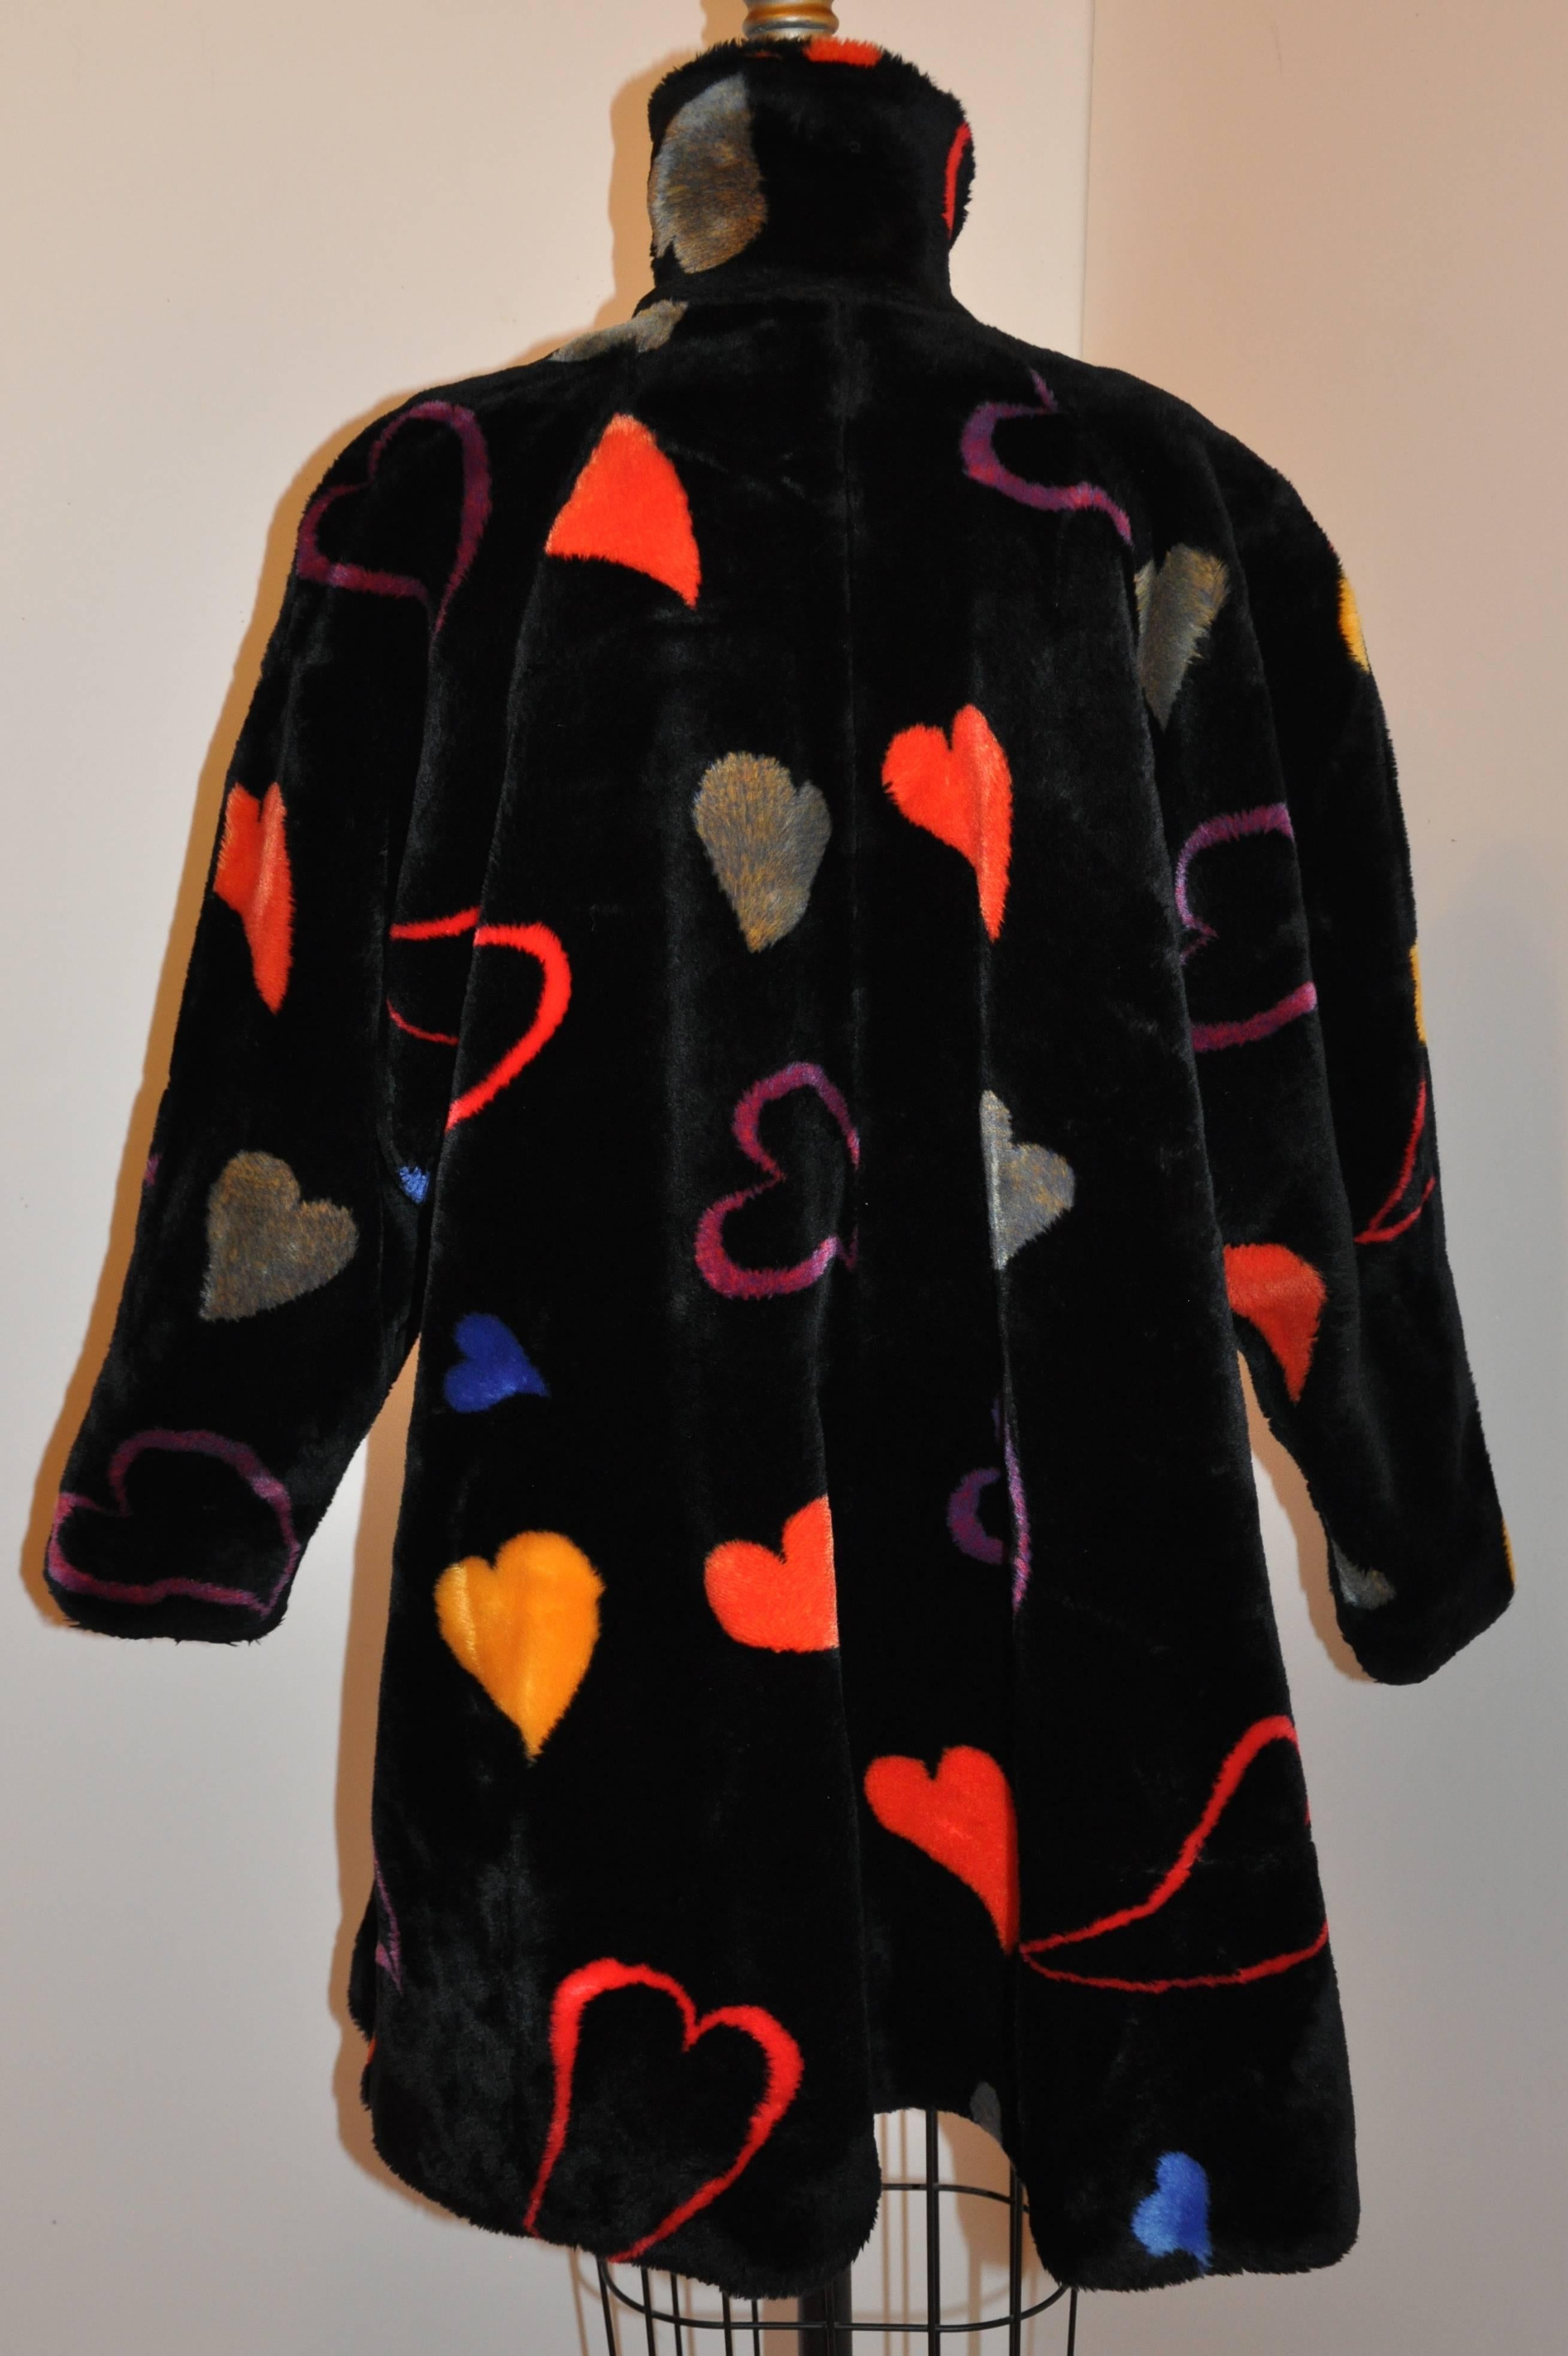 DonnyBrooks wonderful wicked bold abstract black faux fur swing jacket is accented with multi-colors of 